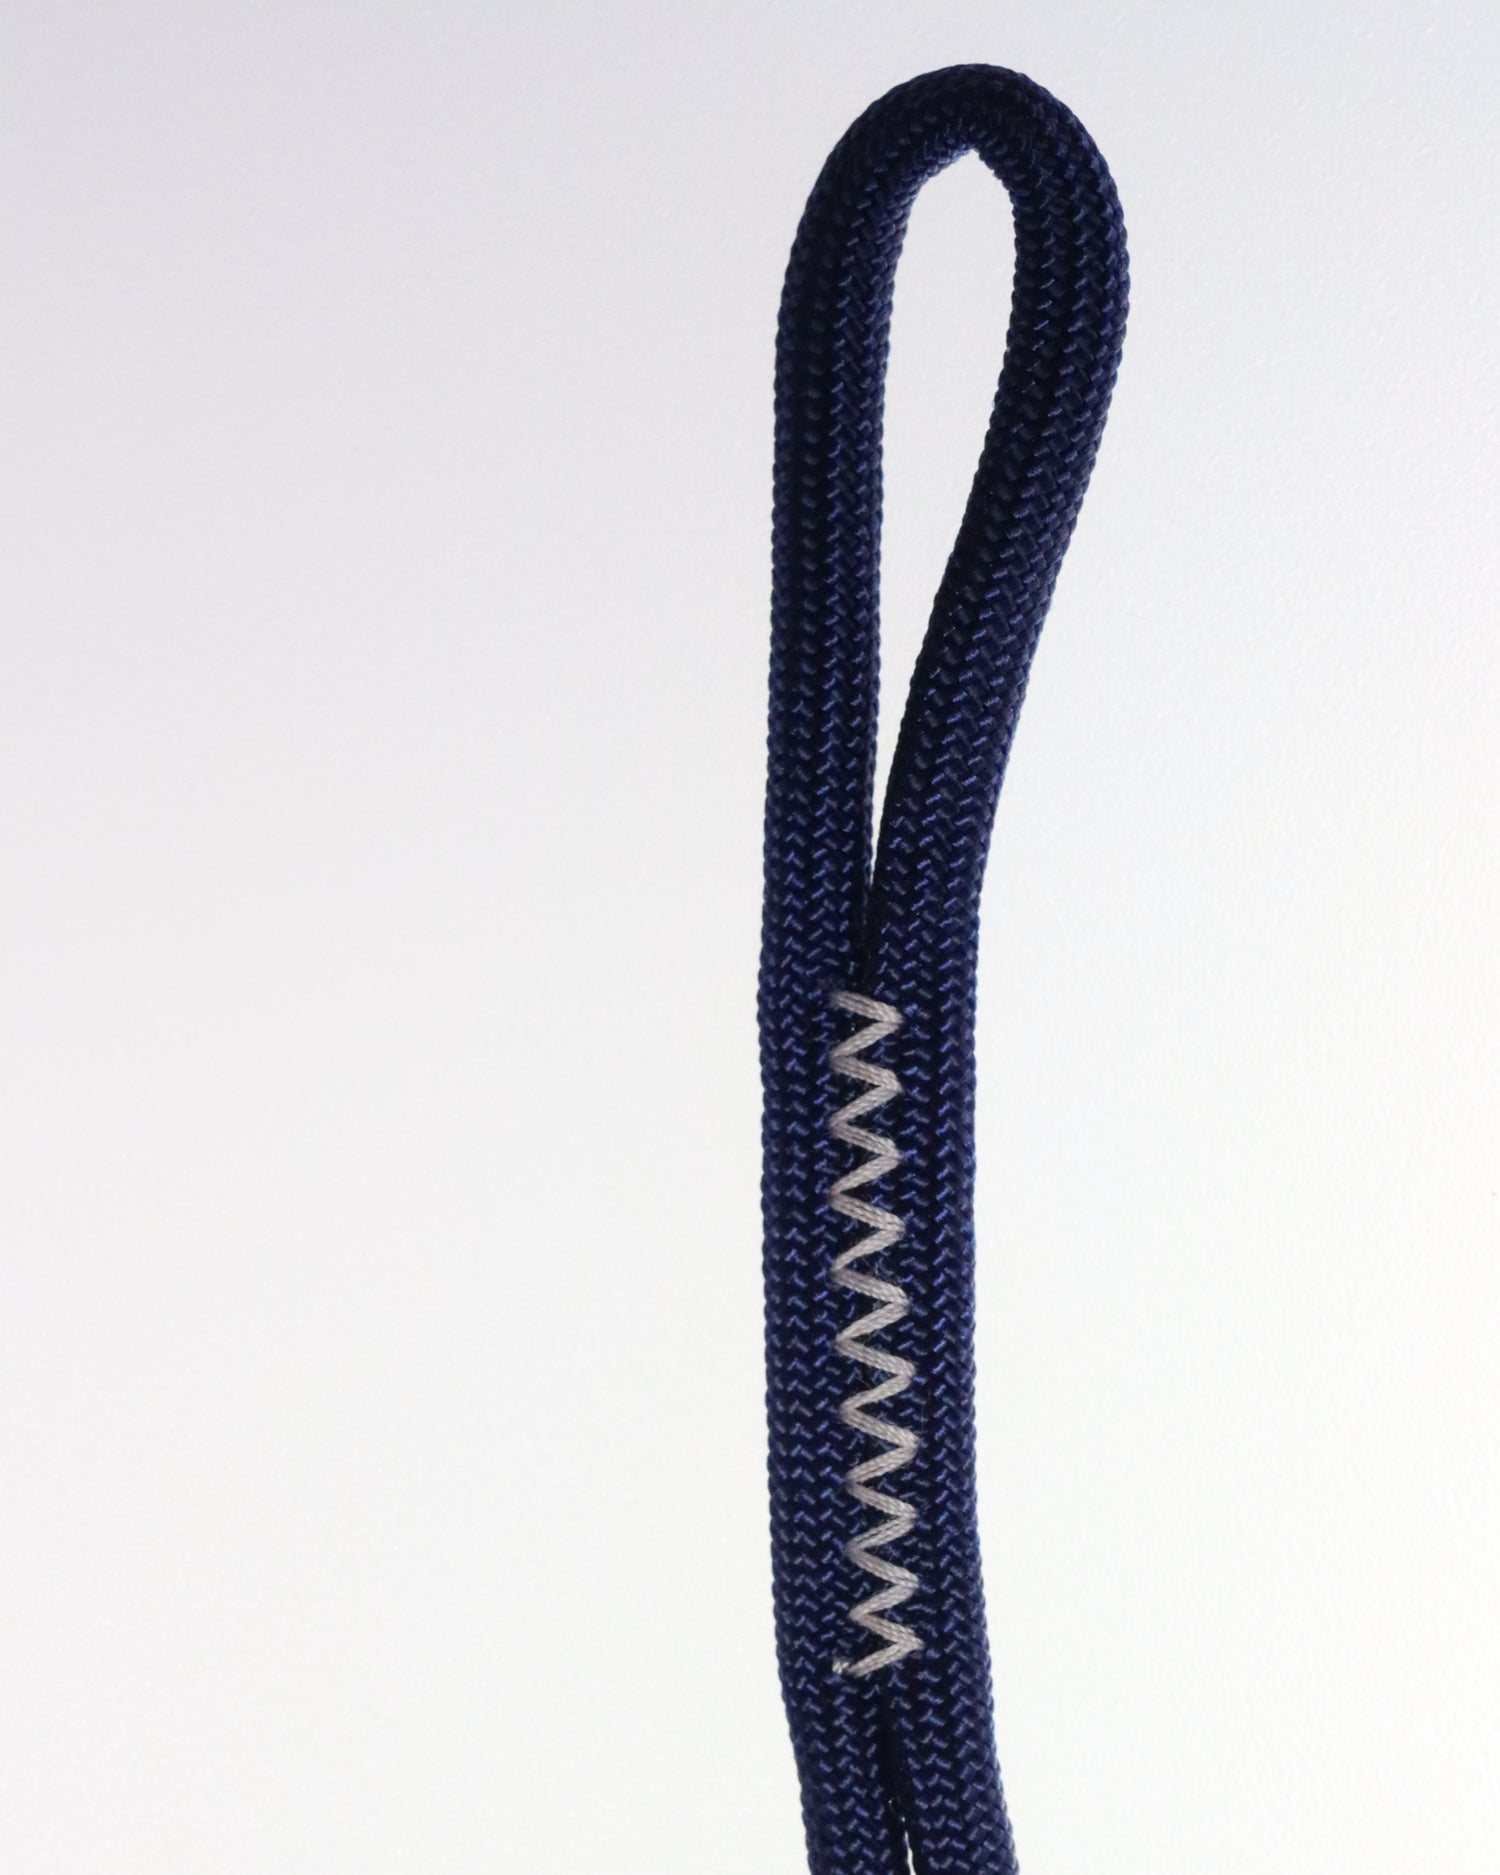 U.BAG Strap Extension made from paracord in color navy blue